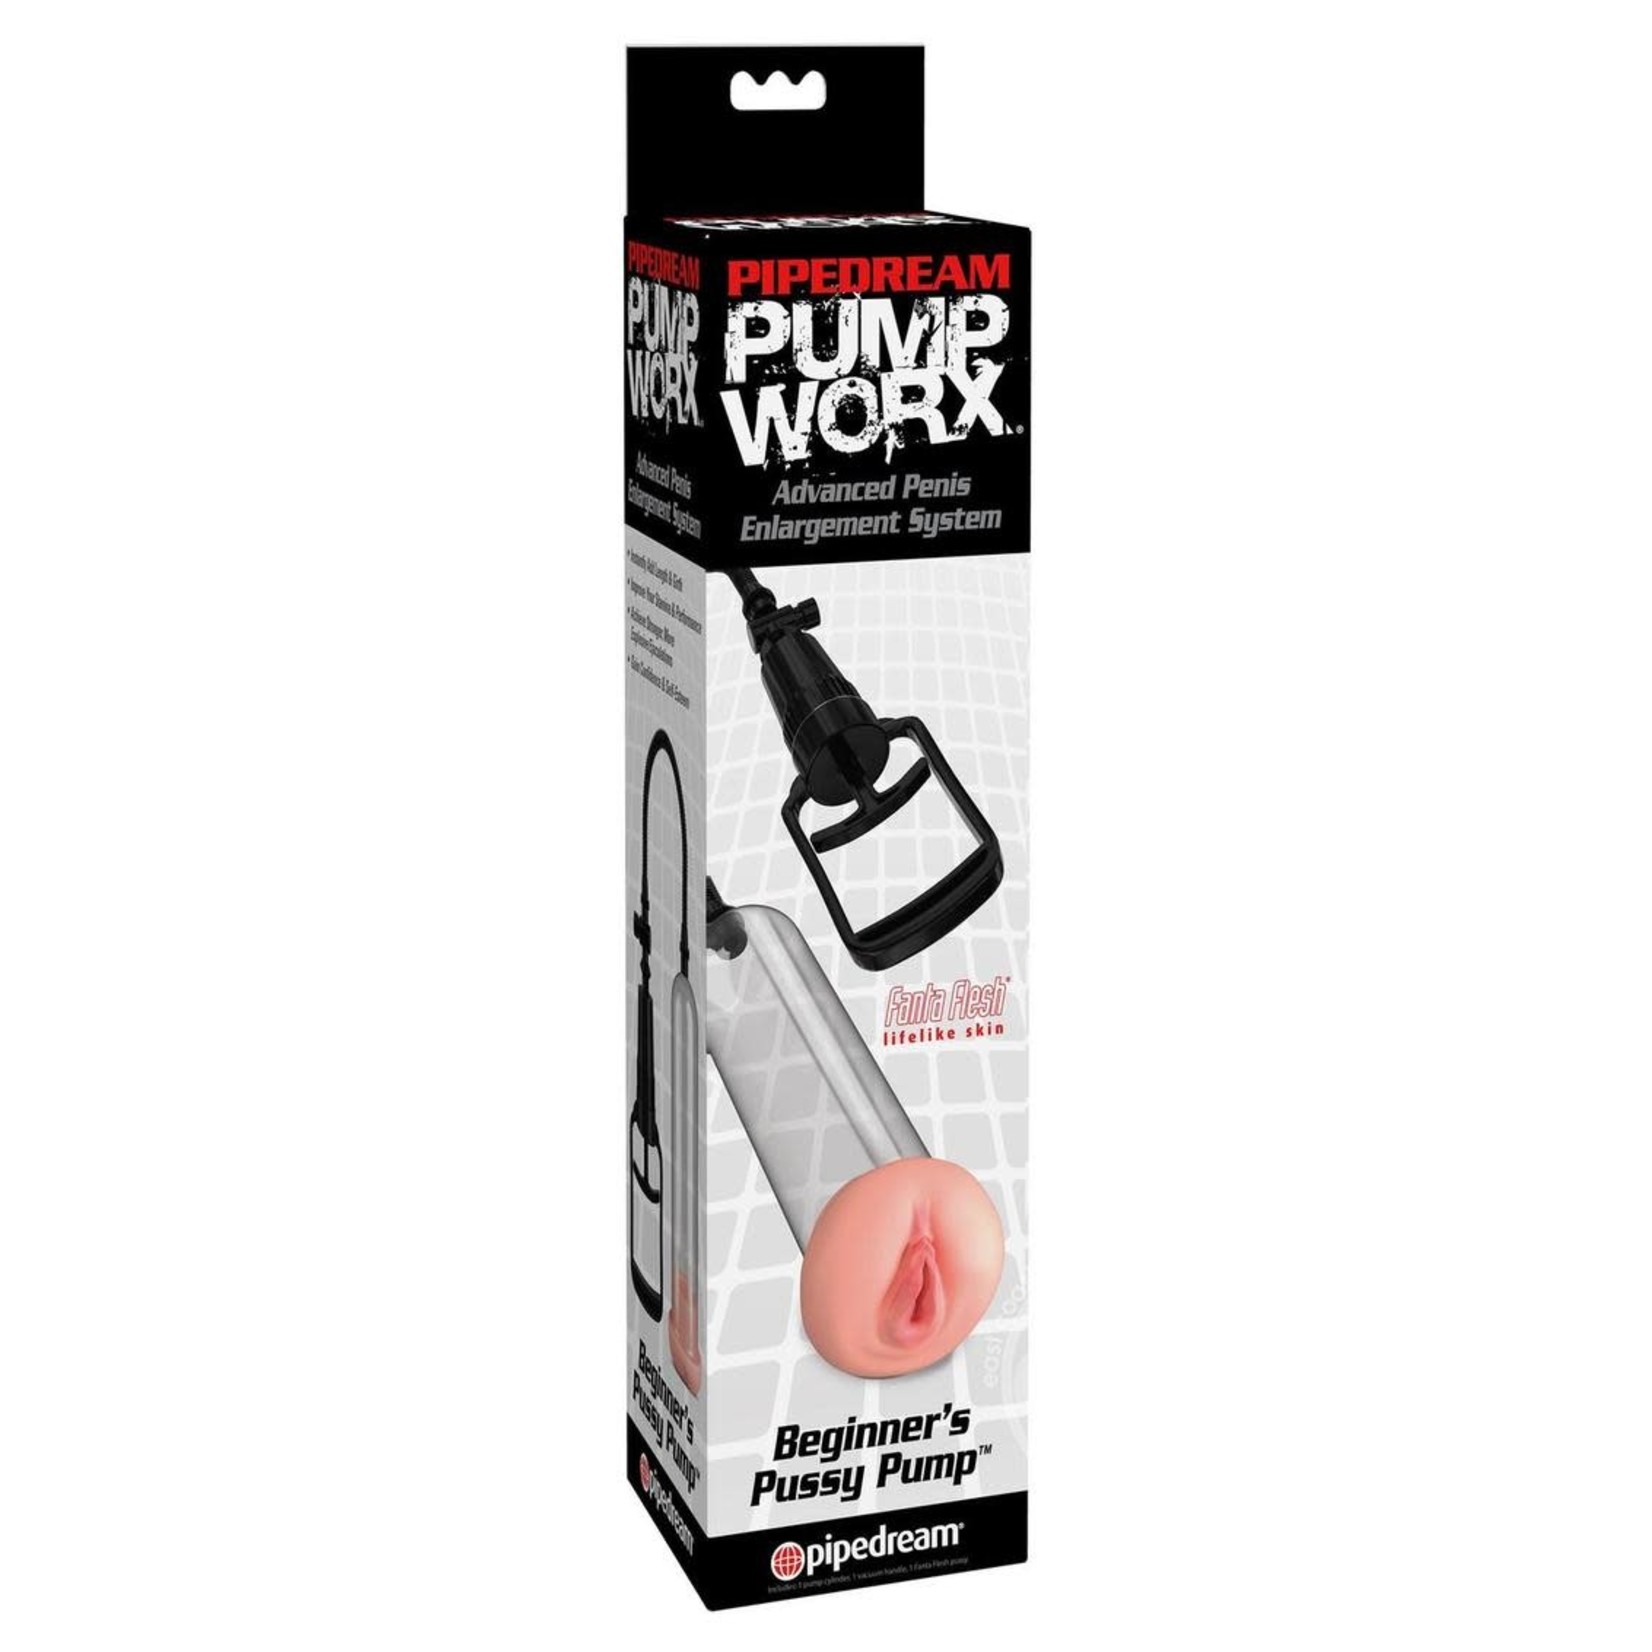 Pump Worx Beginner's Pussy Pump Advanced Penis Enlargement System - Clear And Vanilla